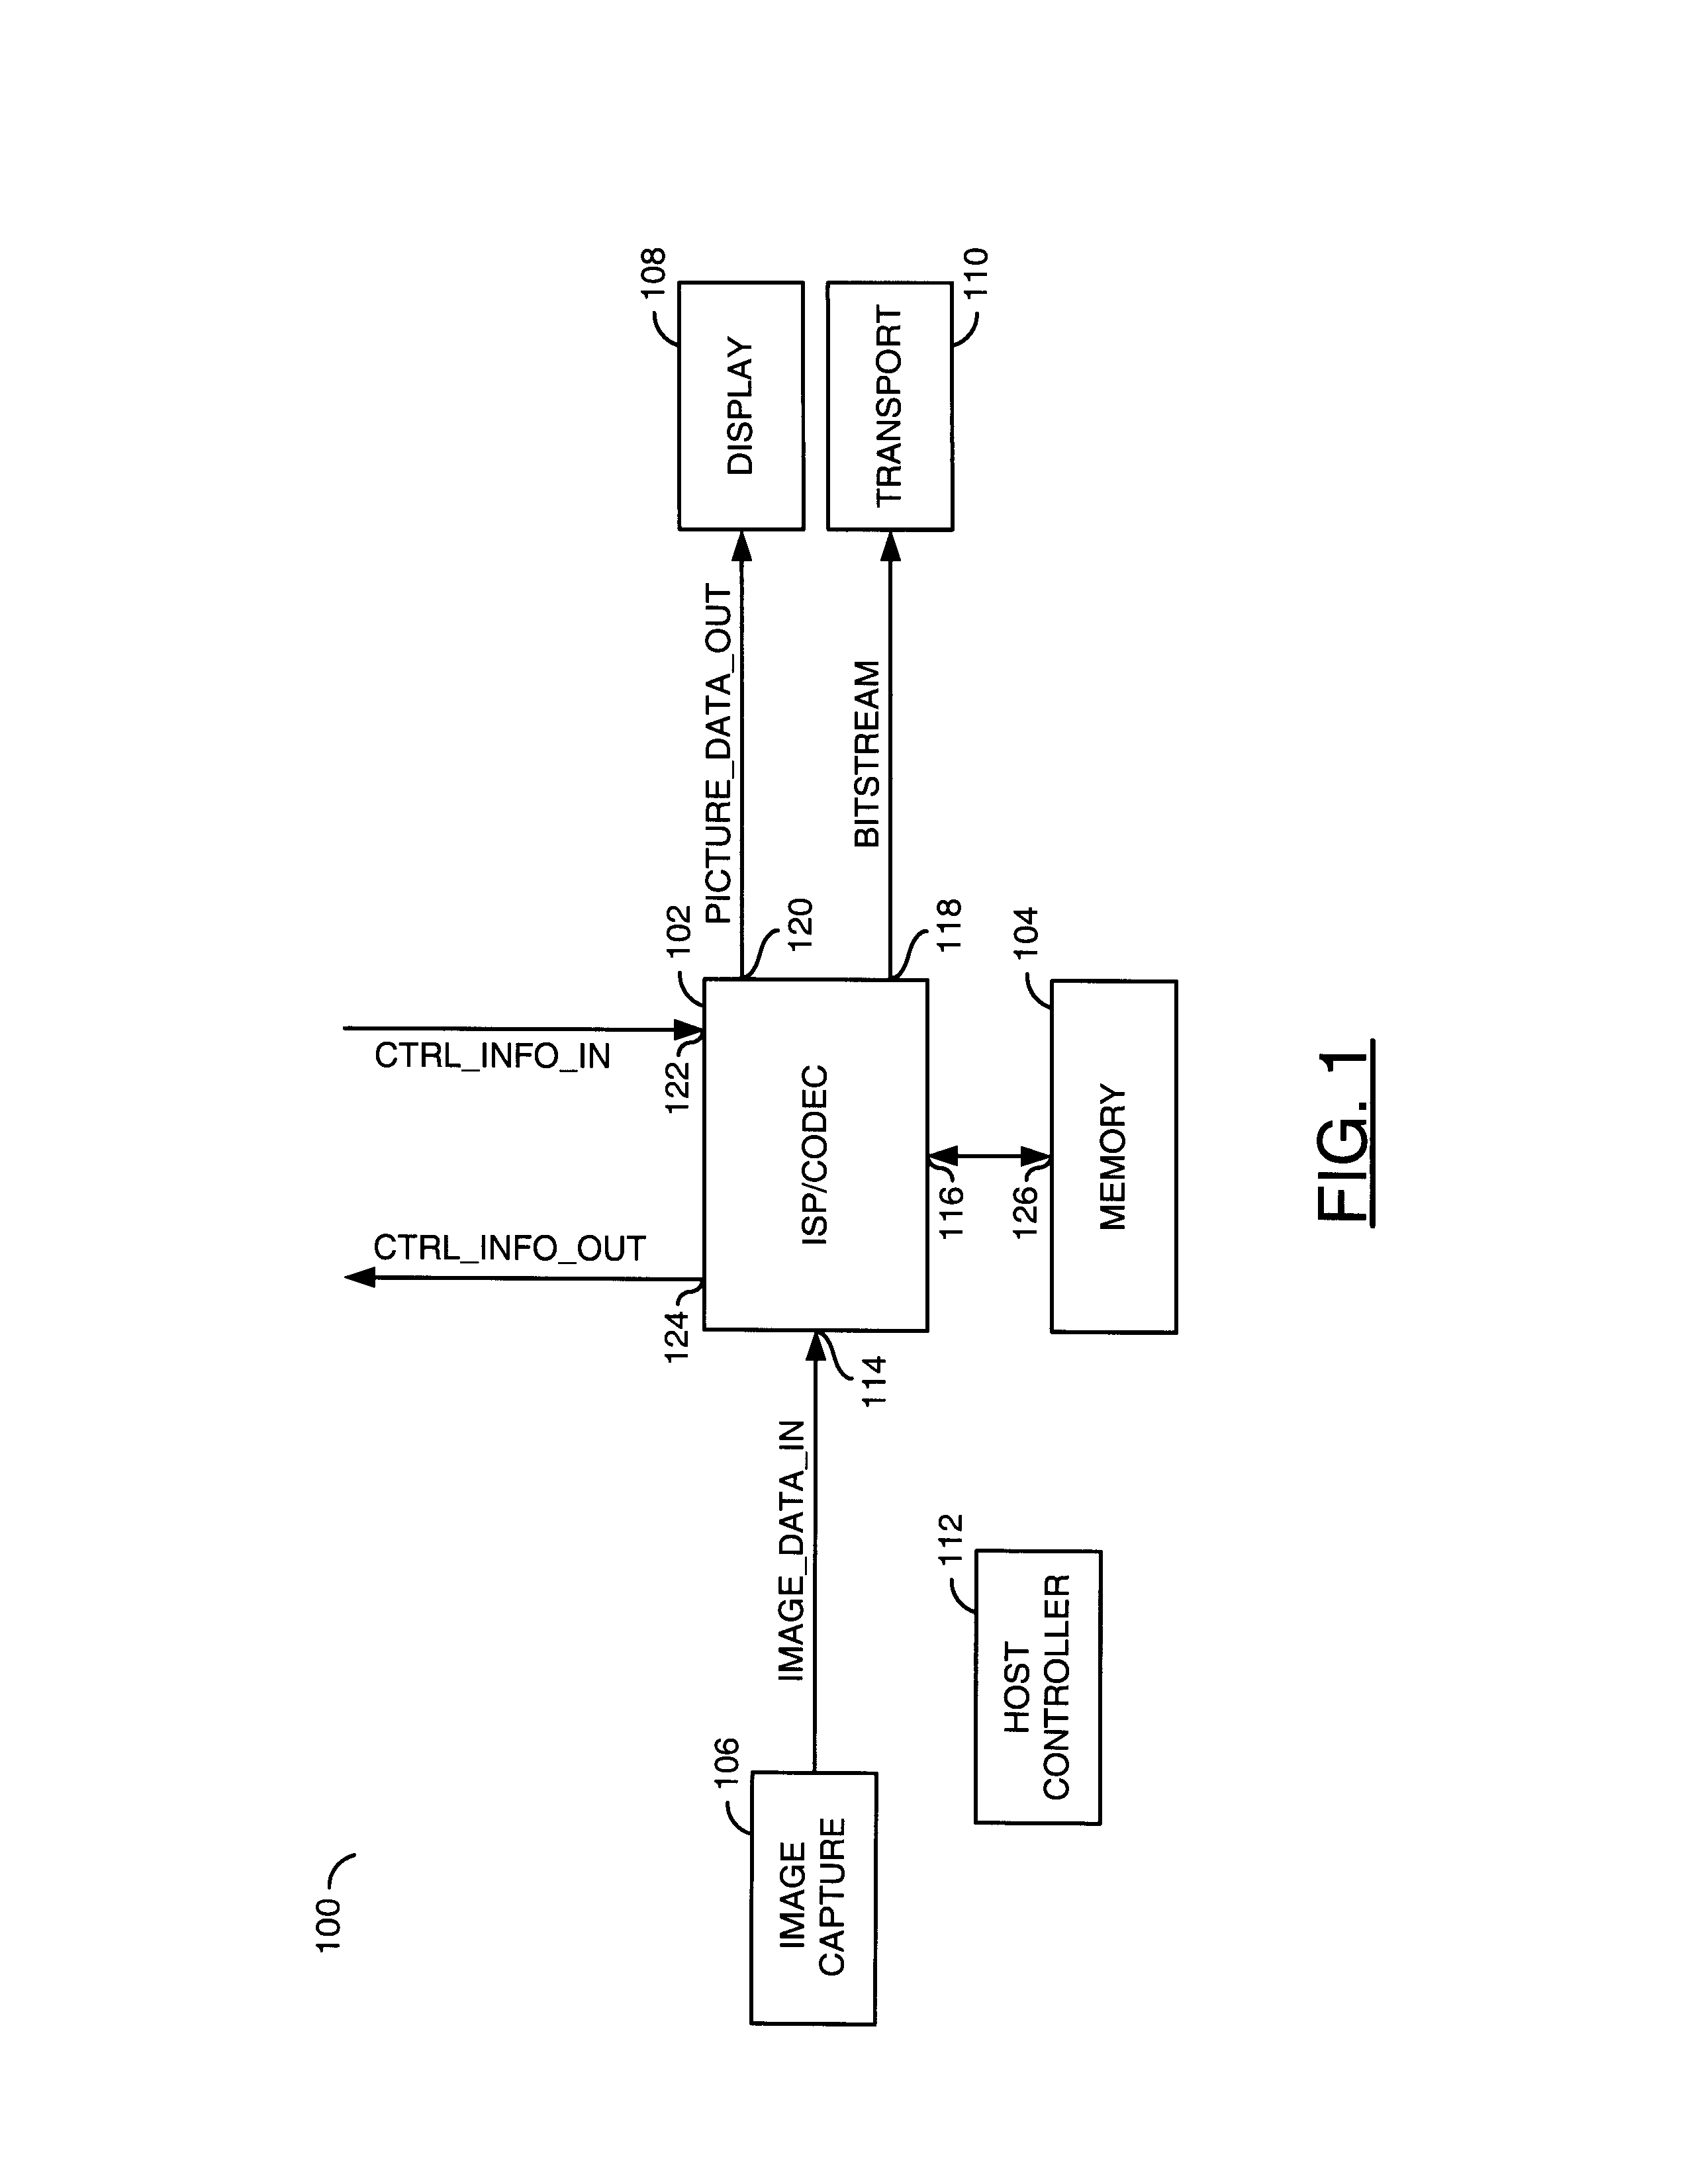 Method and/or architecture for motion estimation using integrated information from camera ISP